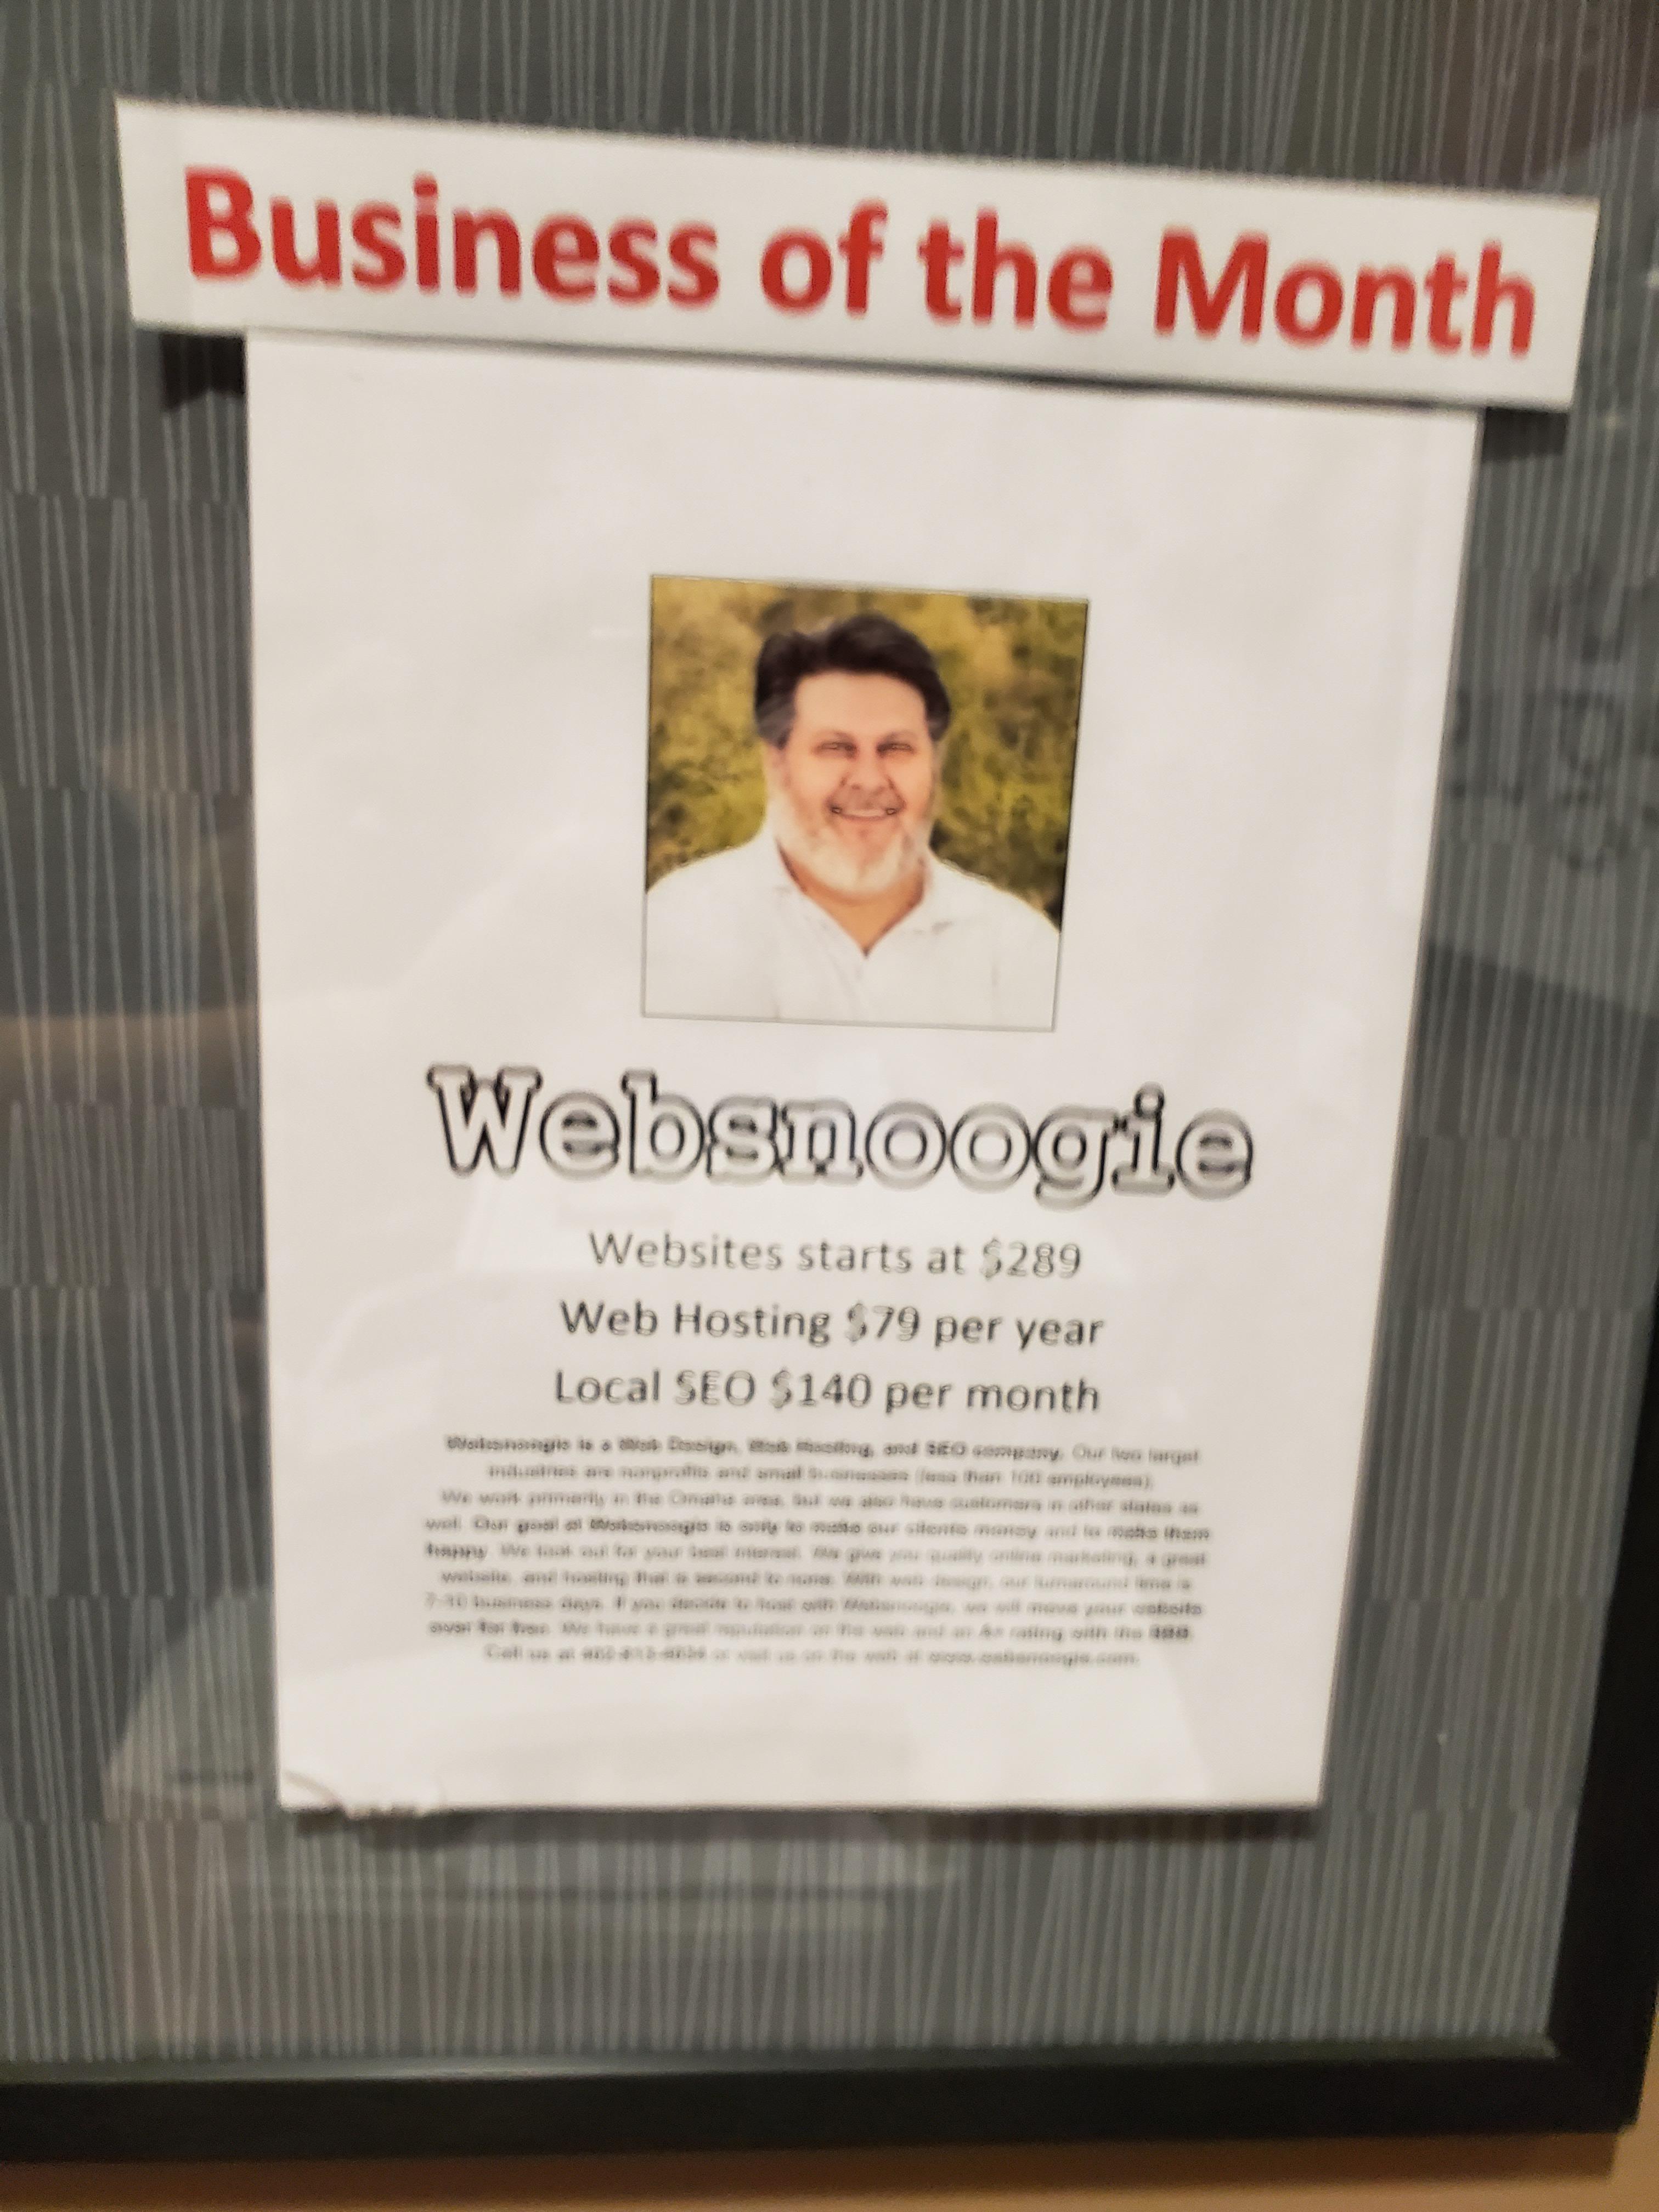 Websnoogie is business of the month at Linden Place! We take pride in the work that we do to serve our customers in the Omaha area with affordable web design and SEO.